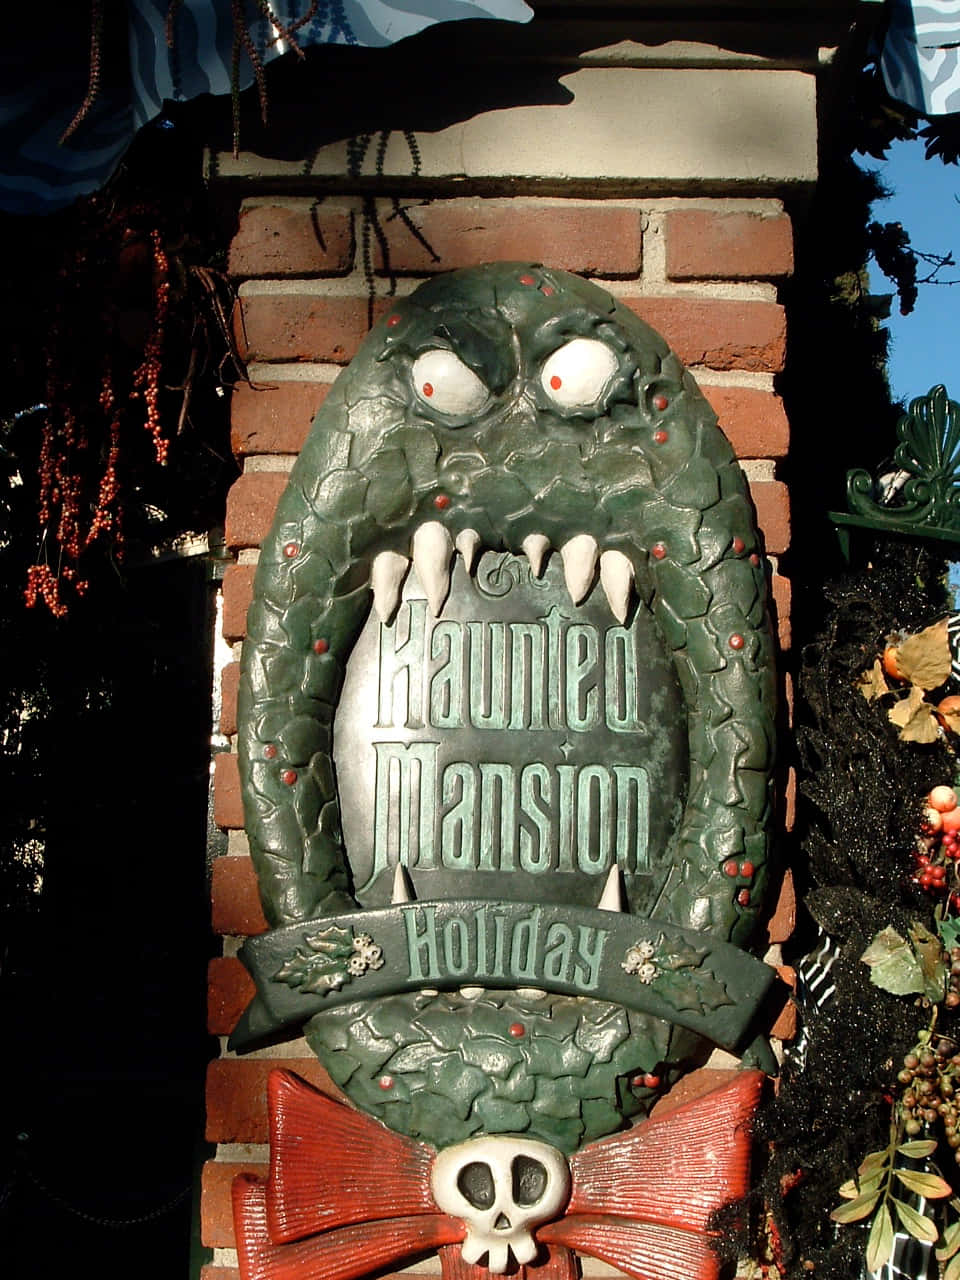 "Experience a horrifyingly delightful journey through a haunted mansion"